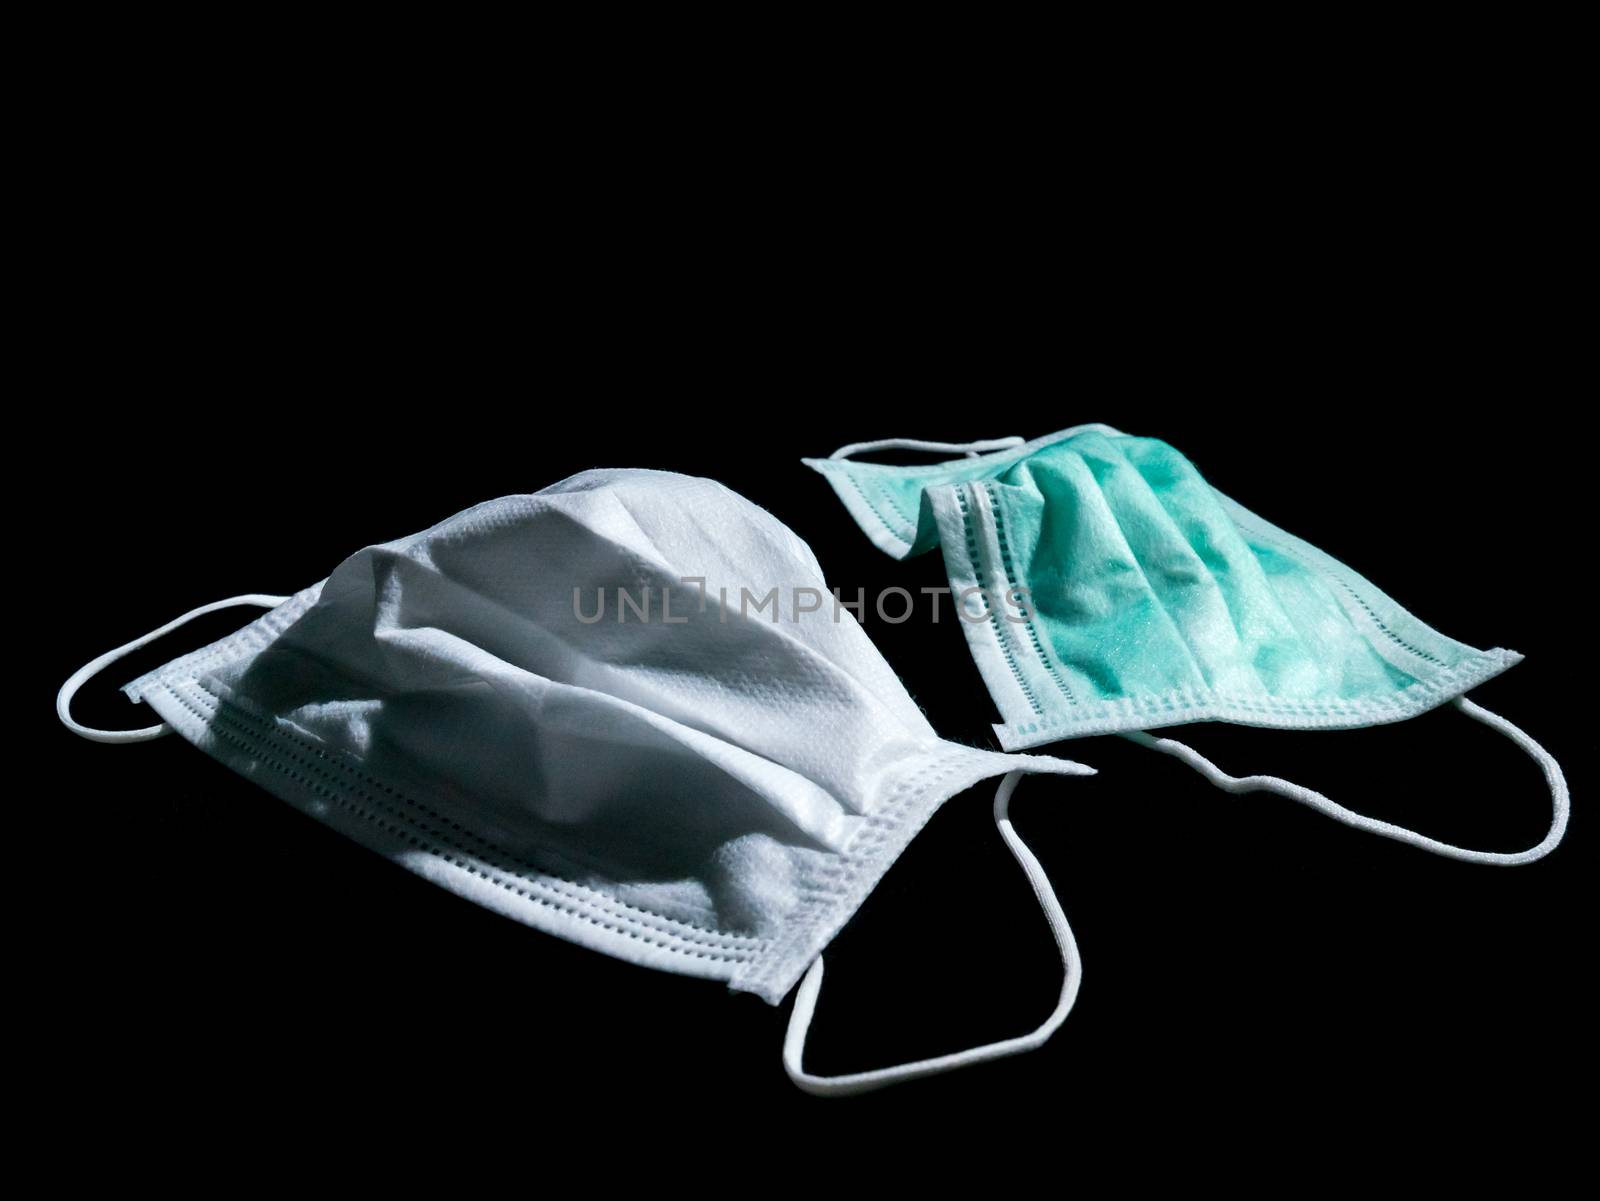 Used white and green surgical masks place on black background. by BOONPLIEN